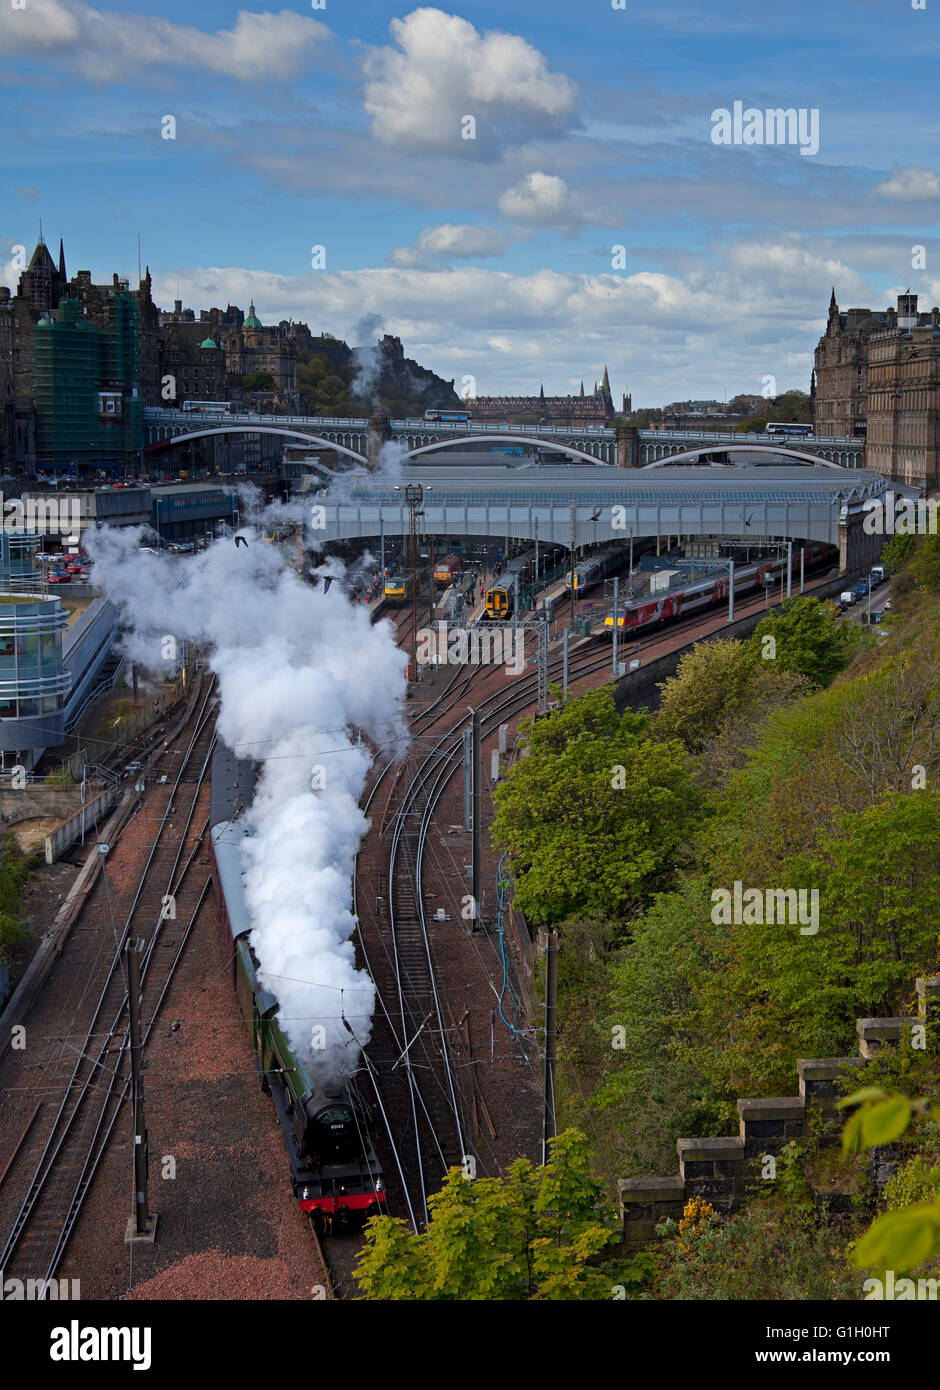 Edinburgh, Scotland, UK, 15 May 2016. The Flying Scotsman locomotive leaves Waverley Station for its day trip to the Scottish Borders on a fine sunny morning. Stock Photo